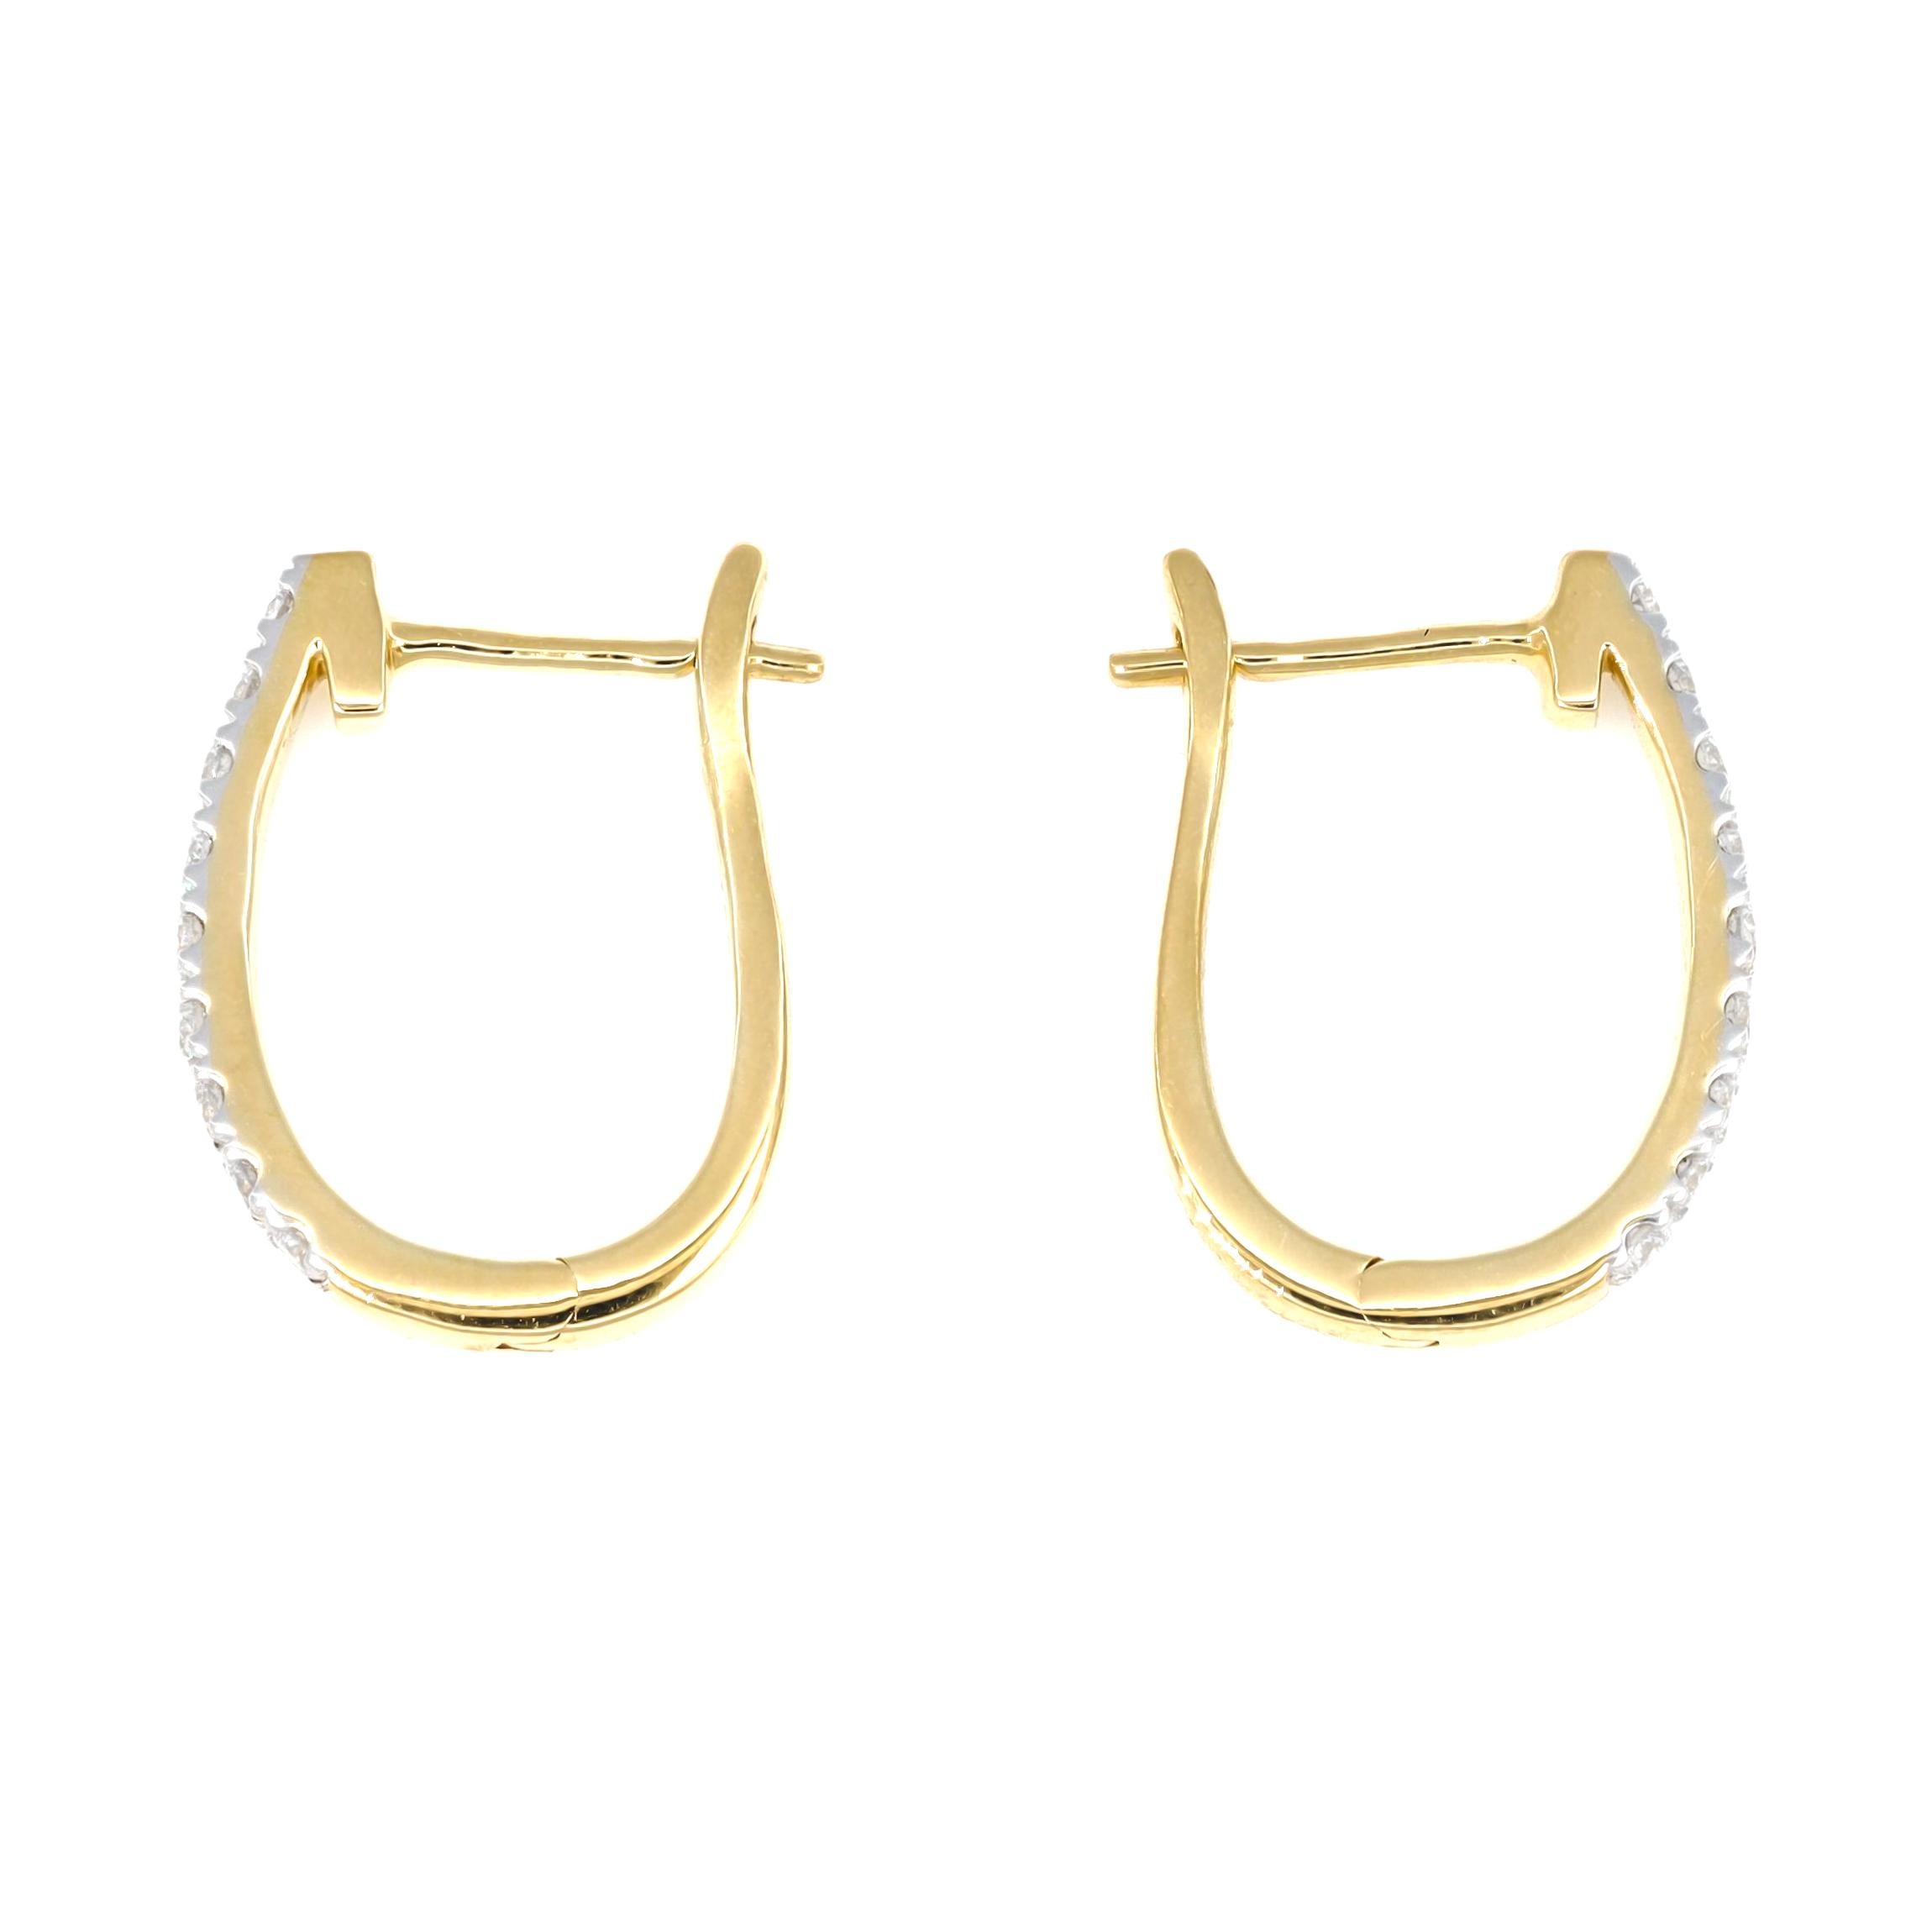 Introducing the epitome of minimalistic beauty, our 18KT Gold Round Diamond Half Hoop Huggies redefine elegance with understated charm.

At the heart of these huggies lie brilliant round diamonds, totaling 0.35 carats, exuding a captivating sparkle